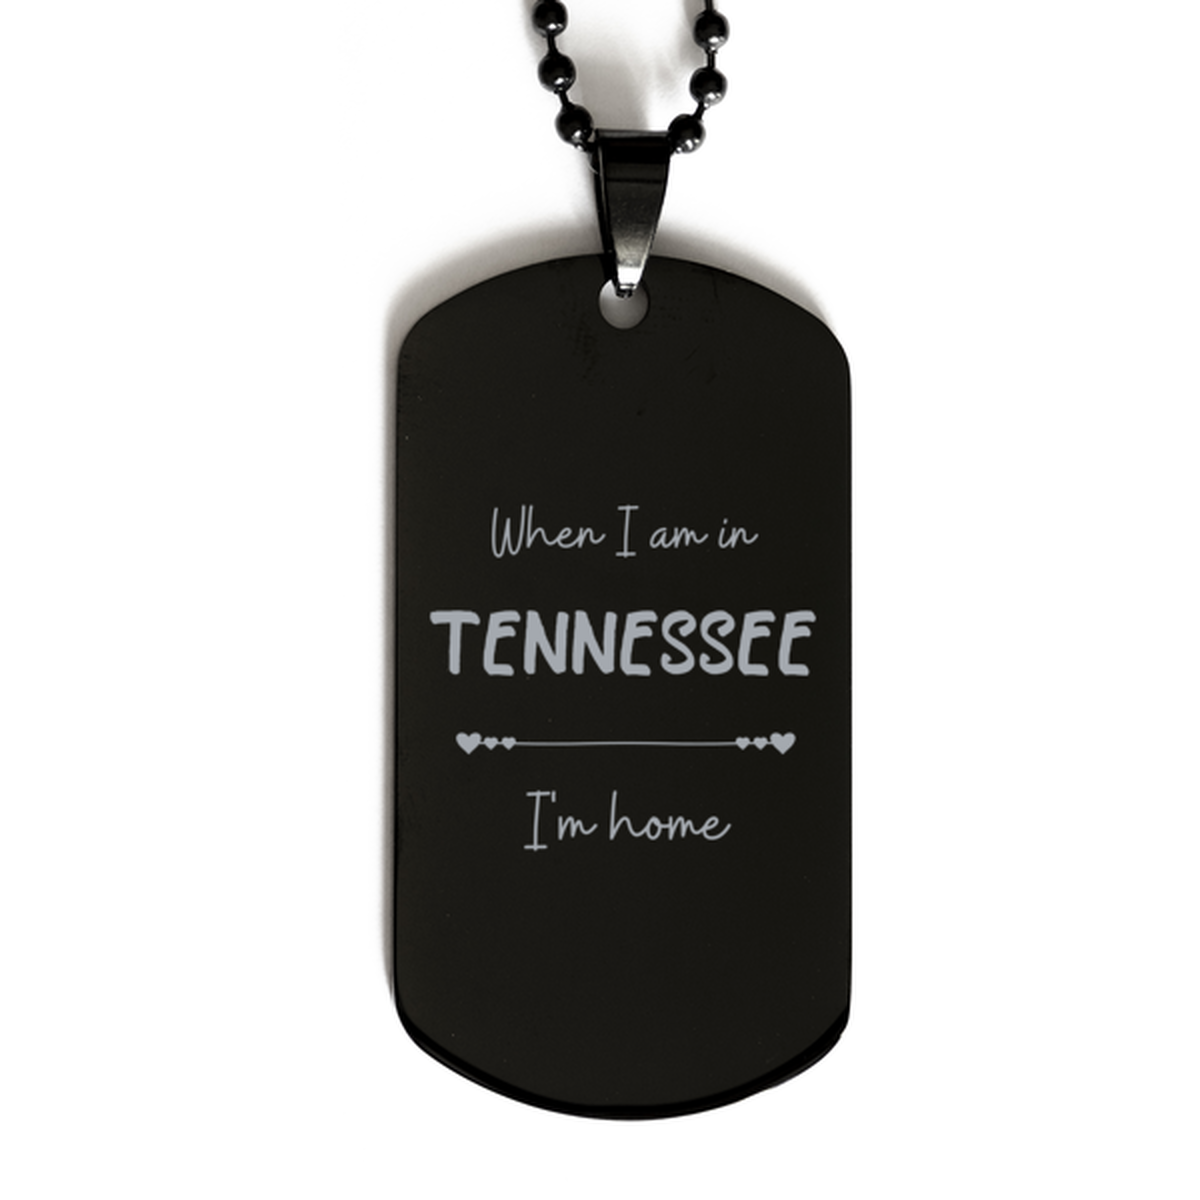 When I am in Tennessee I'm home Black Dog Tag, Cheap Gifts For Tennessee, State Tennessee Birthday Gifts for Friends Coworker